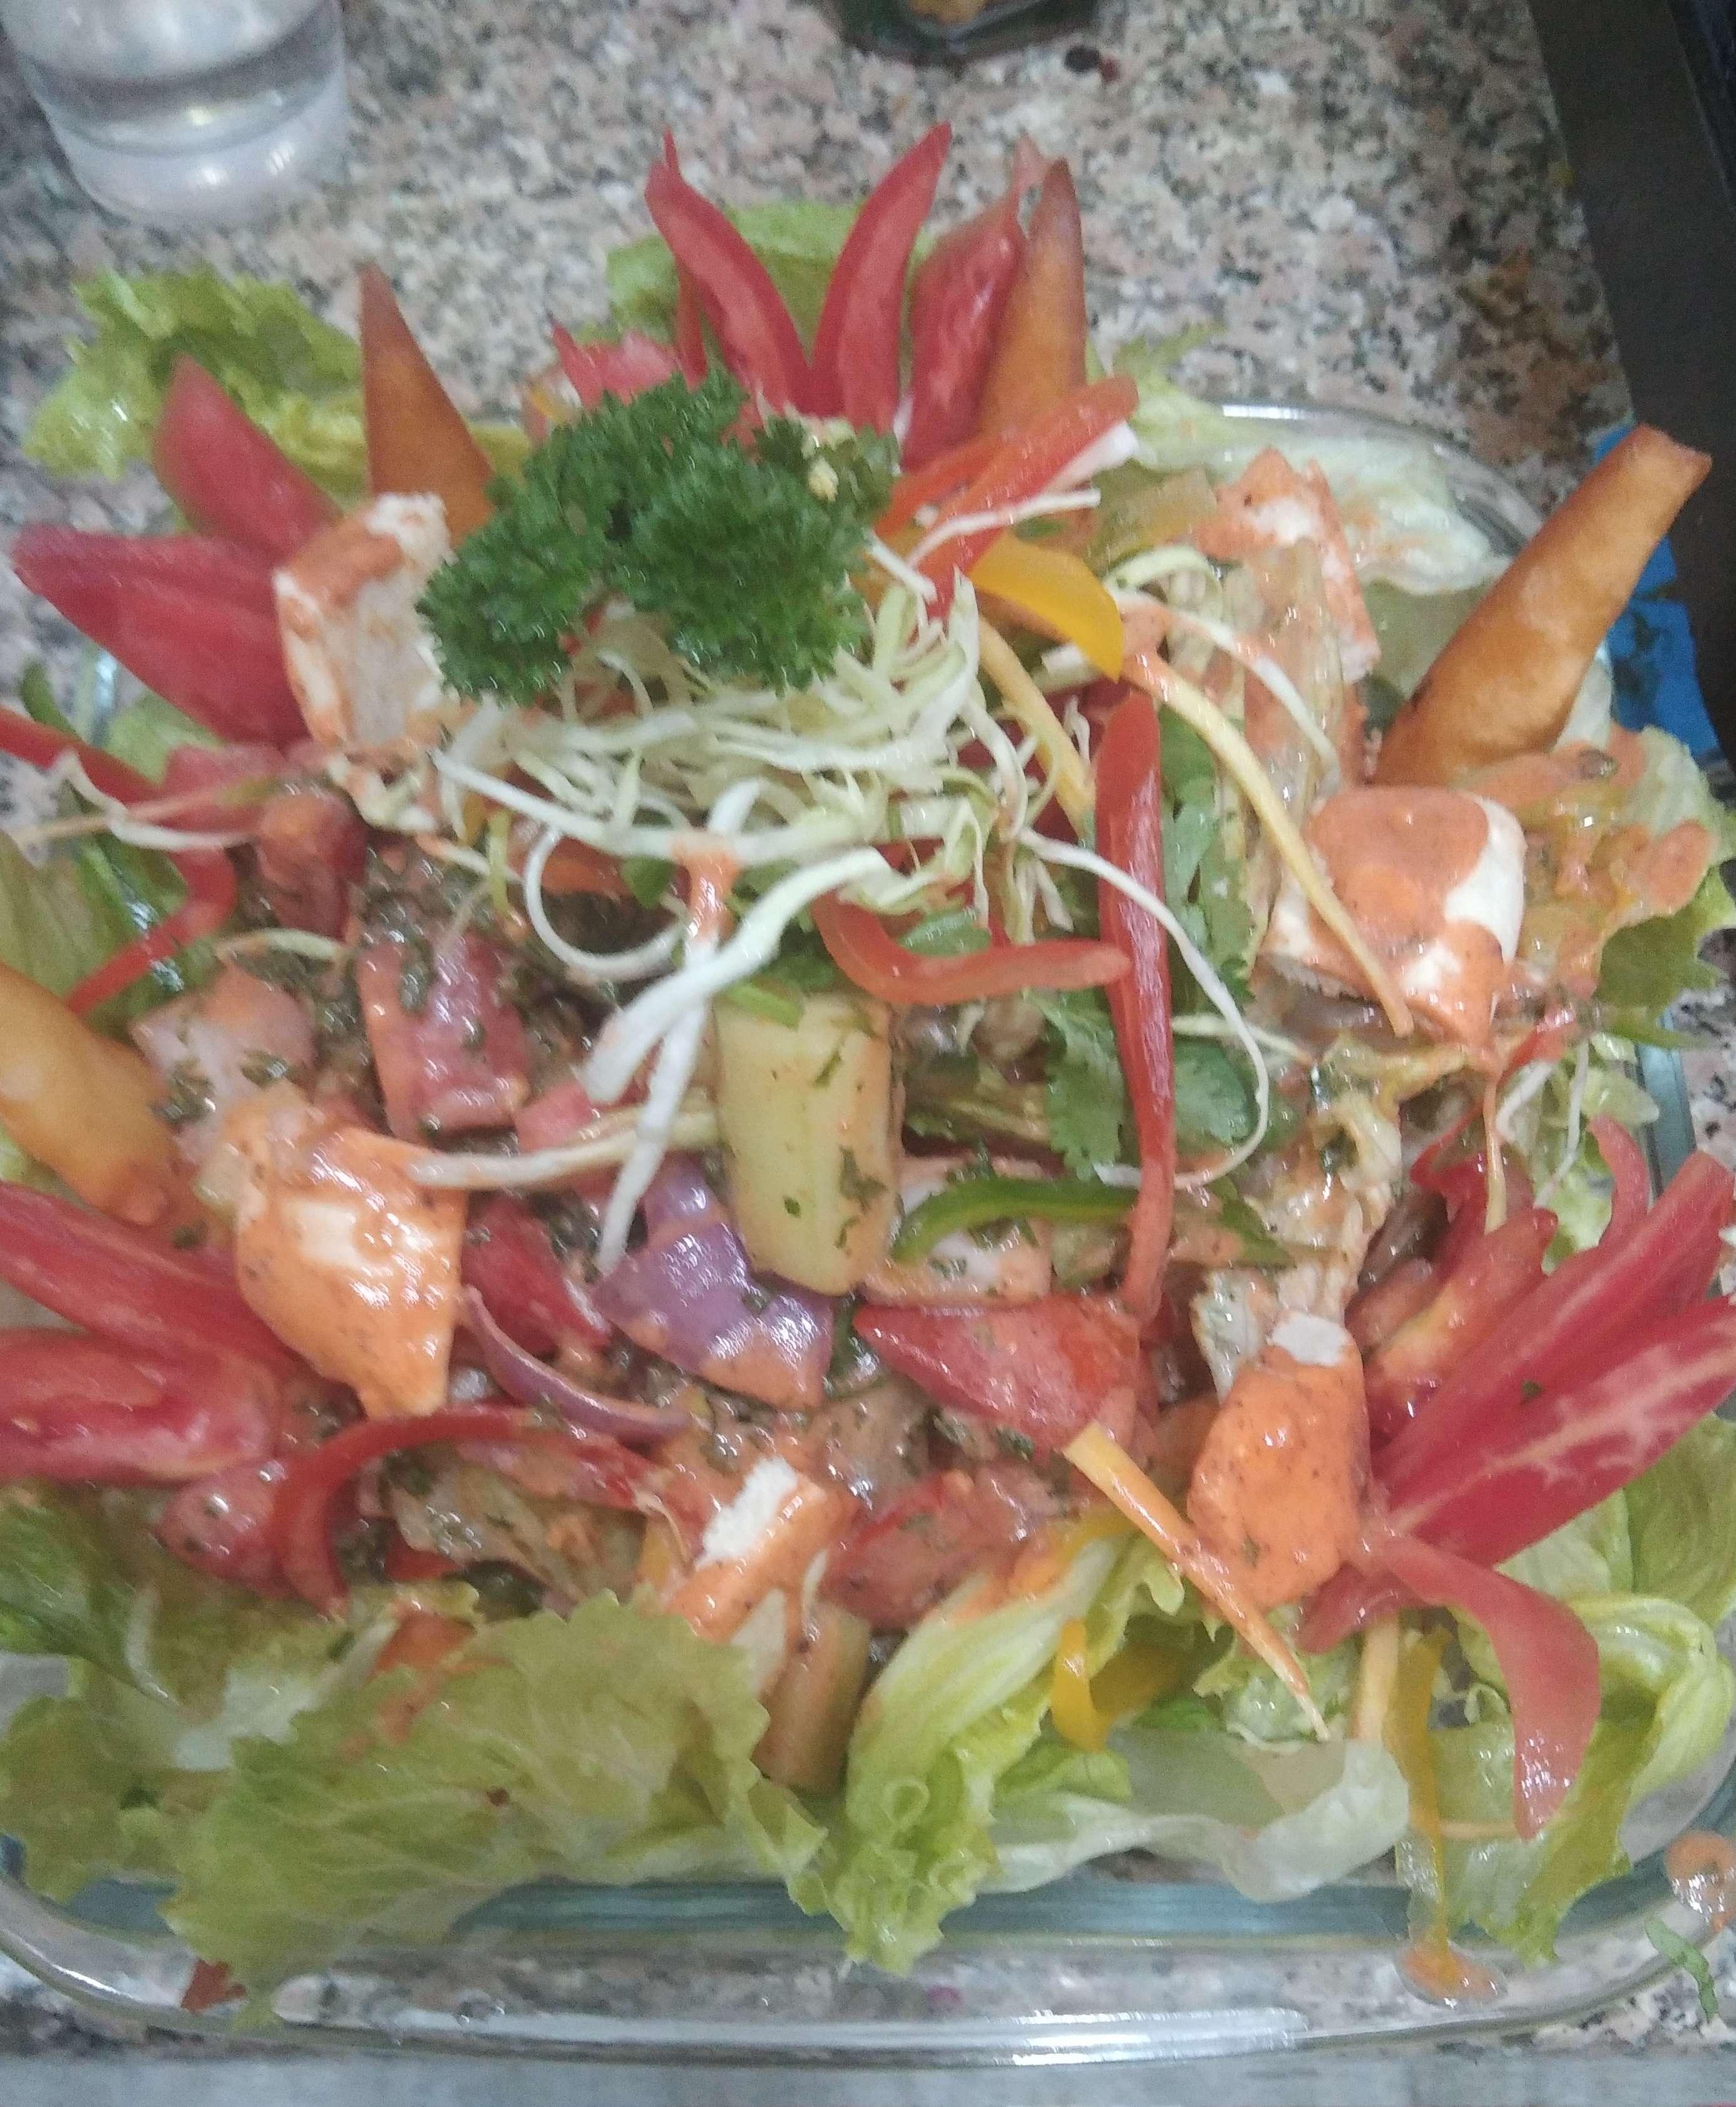 Tasty Fattoush Salad cooked by COOX chefs cooks during occasions parties events at home